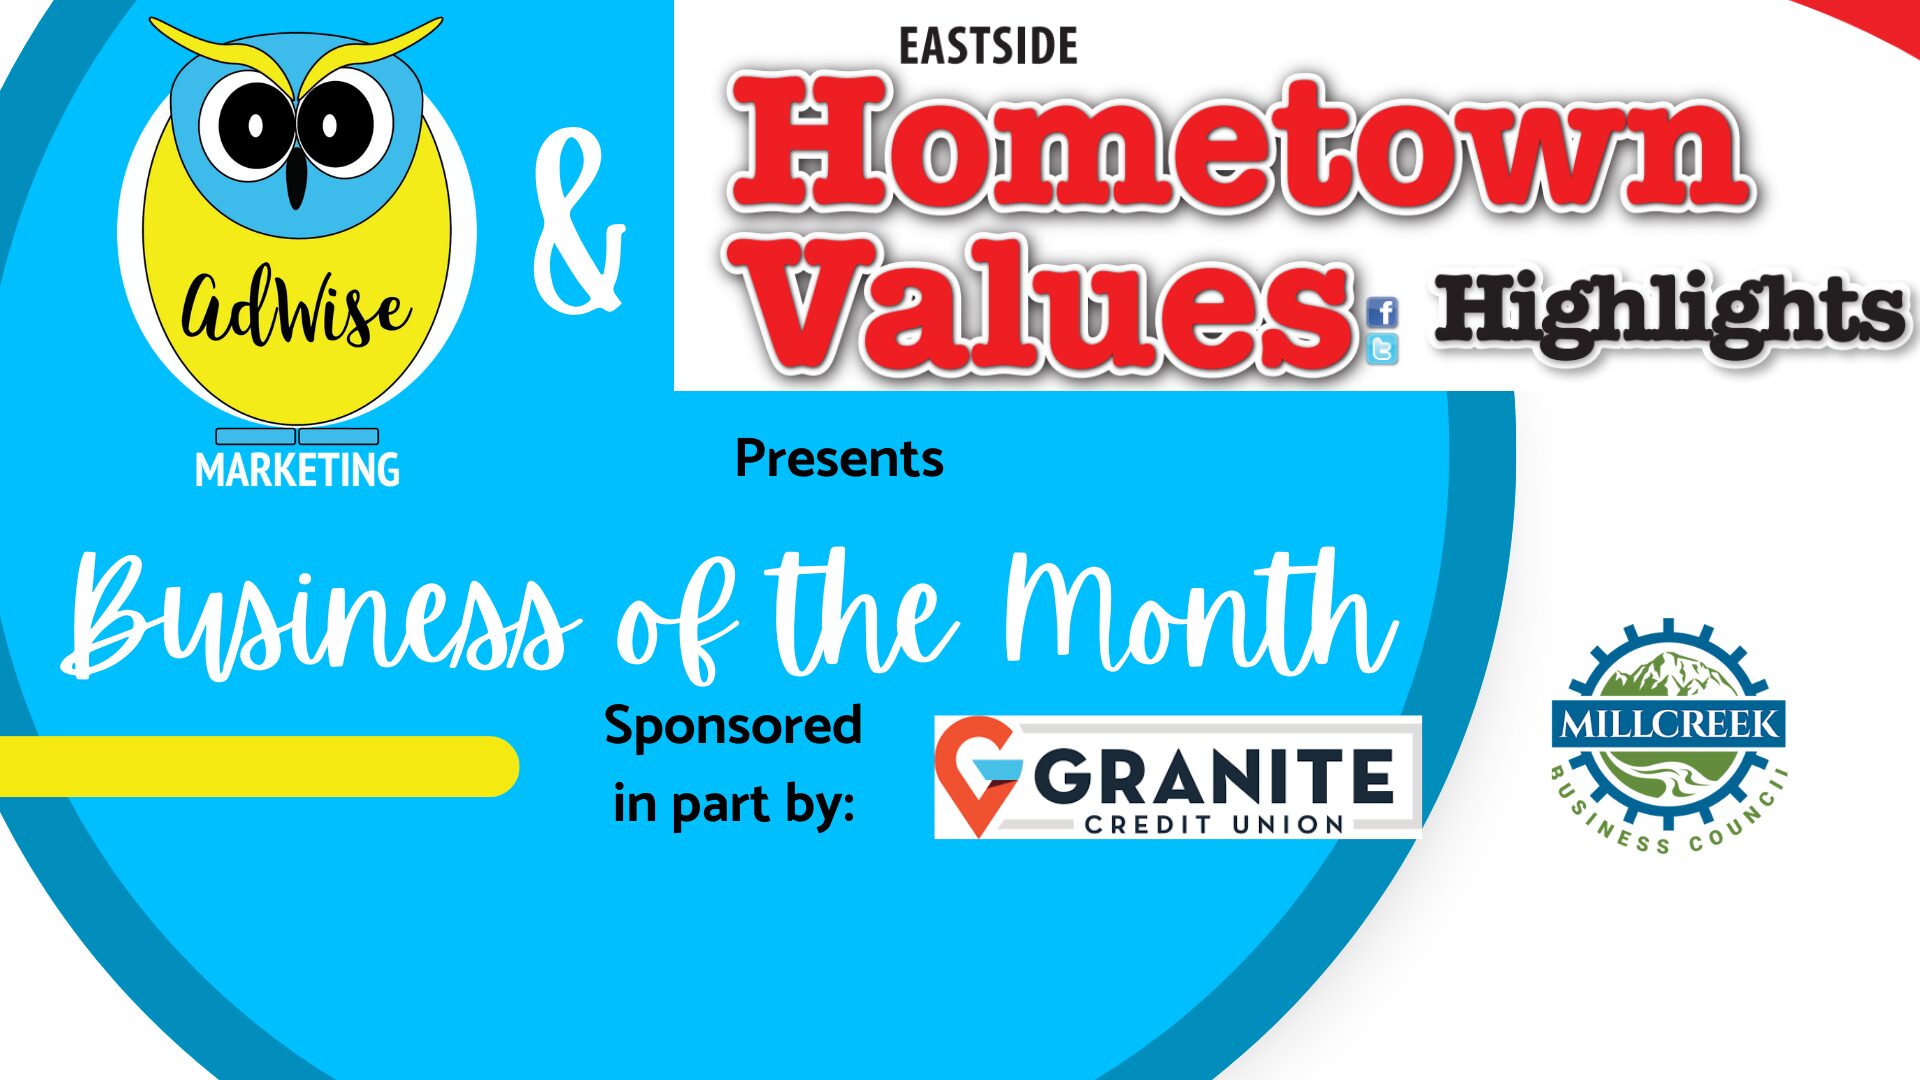 Adwise Marketing & Hometown Values eastside present Business of the month sponsored by Millcreek Business Council and Granite Credit Union, branded for Adwise with yellow and blue bubbles/circles. 